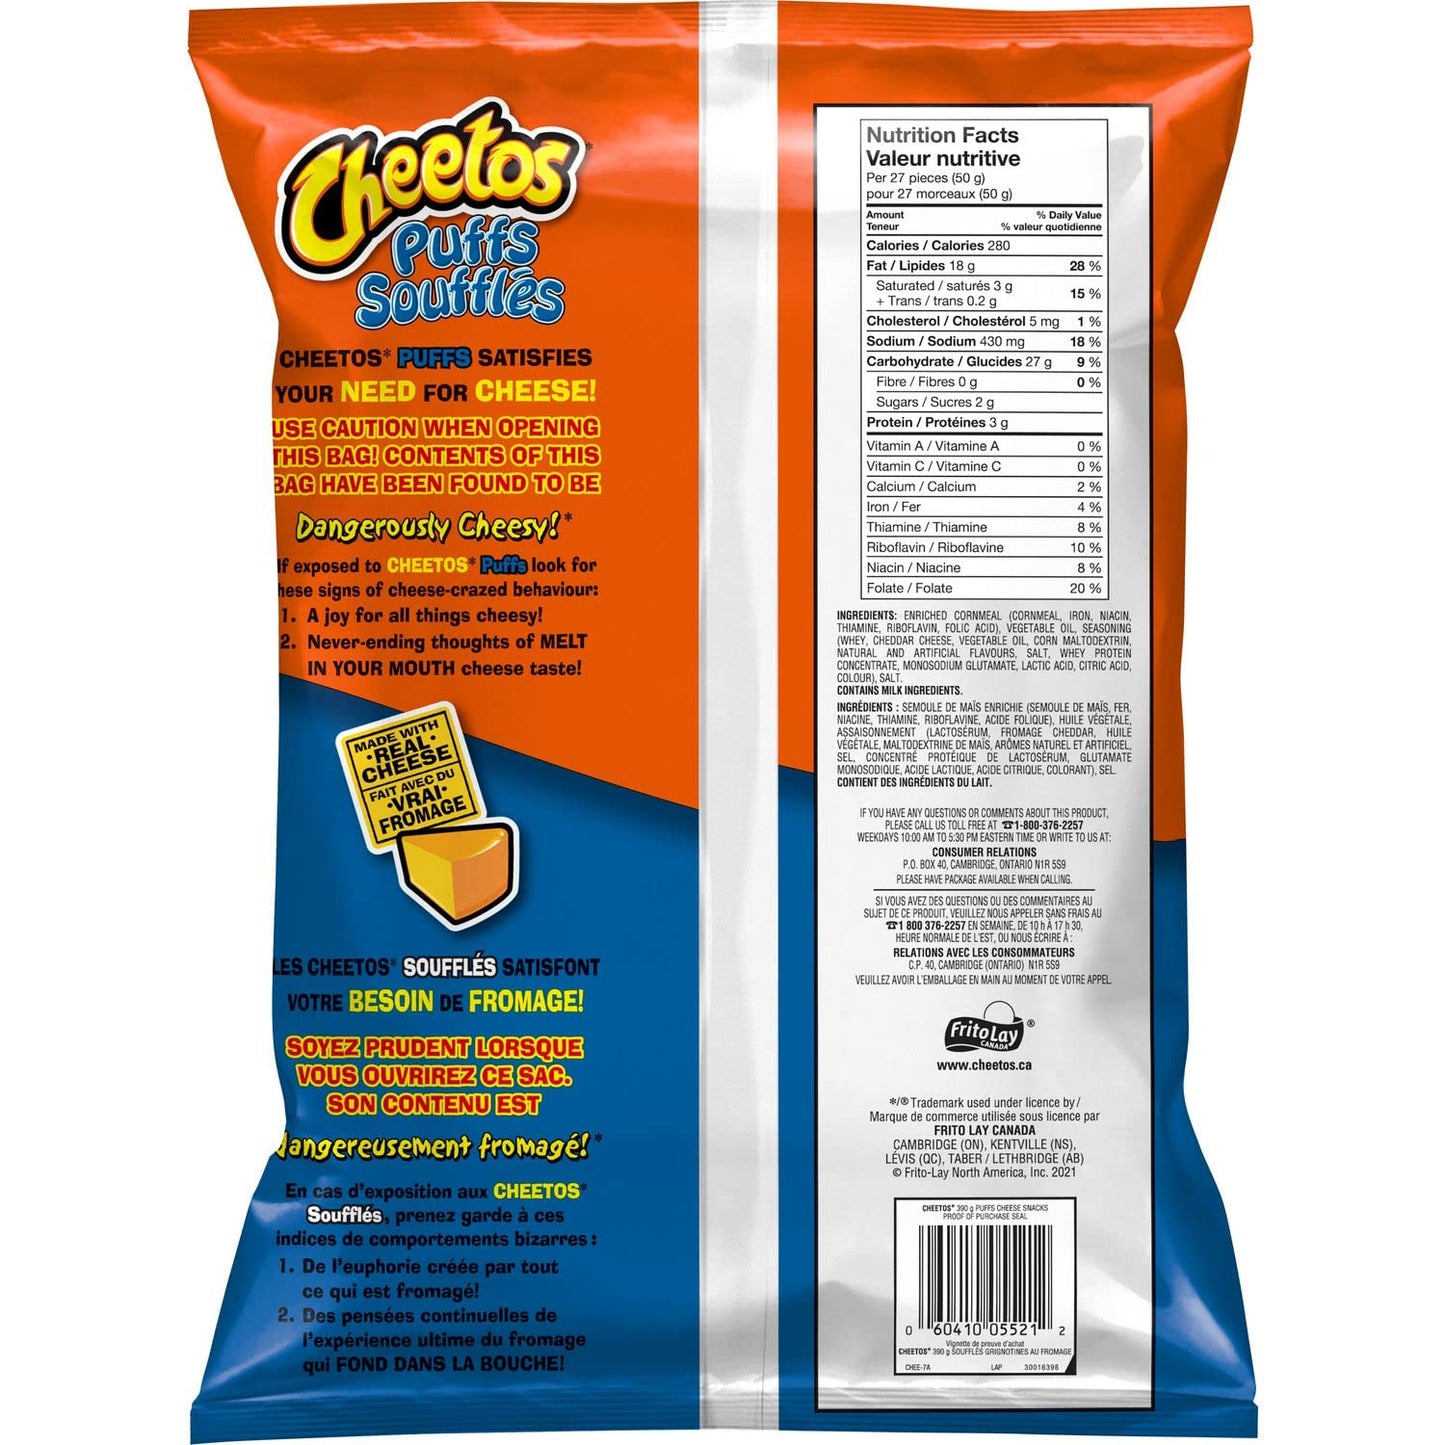 Cheetos Puffs Value Sized Bag back cover